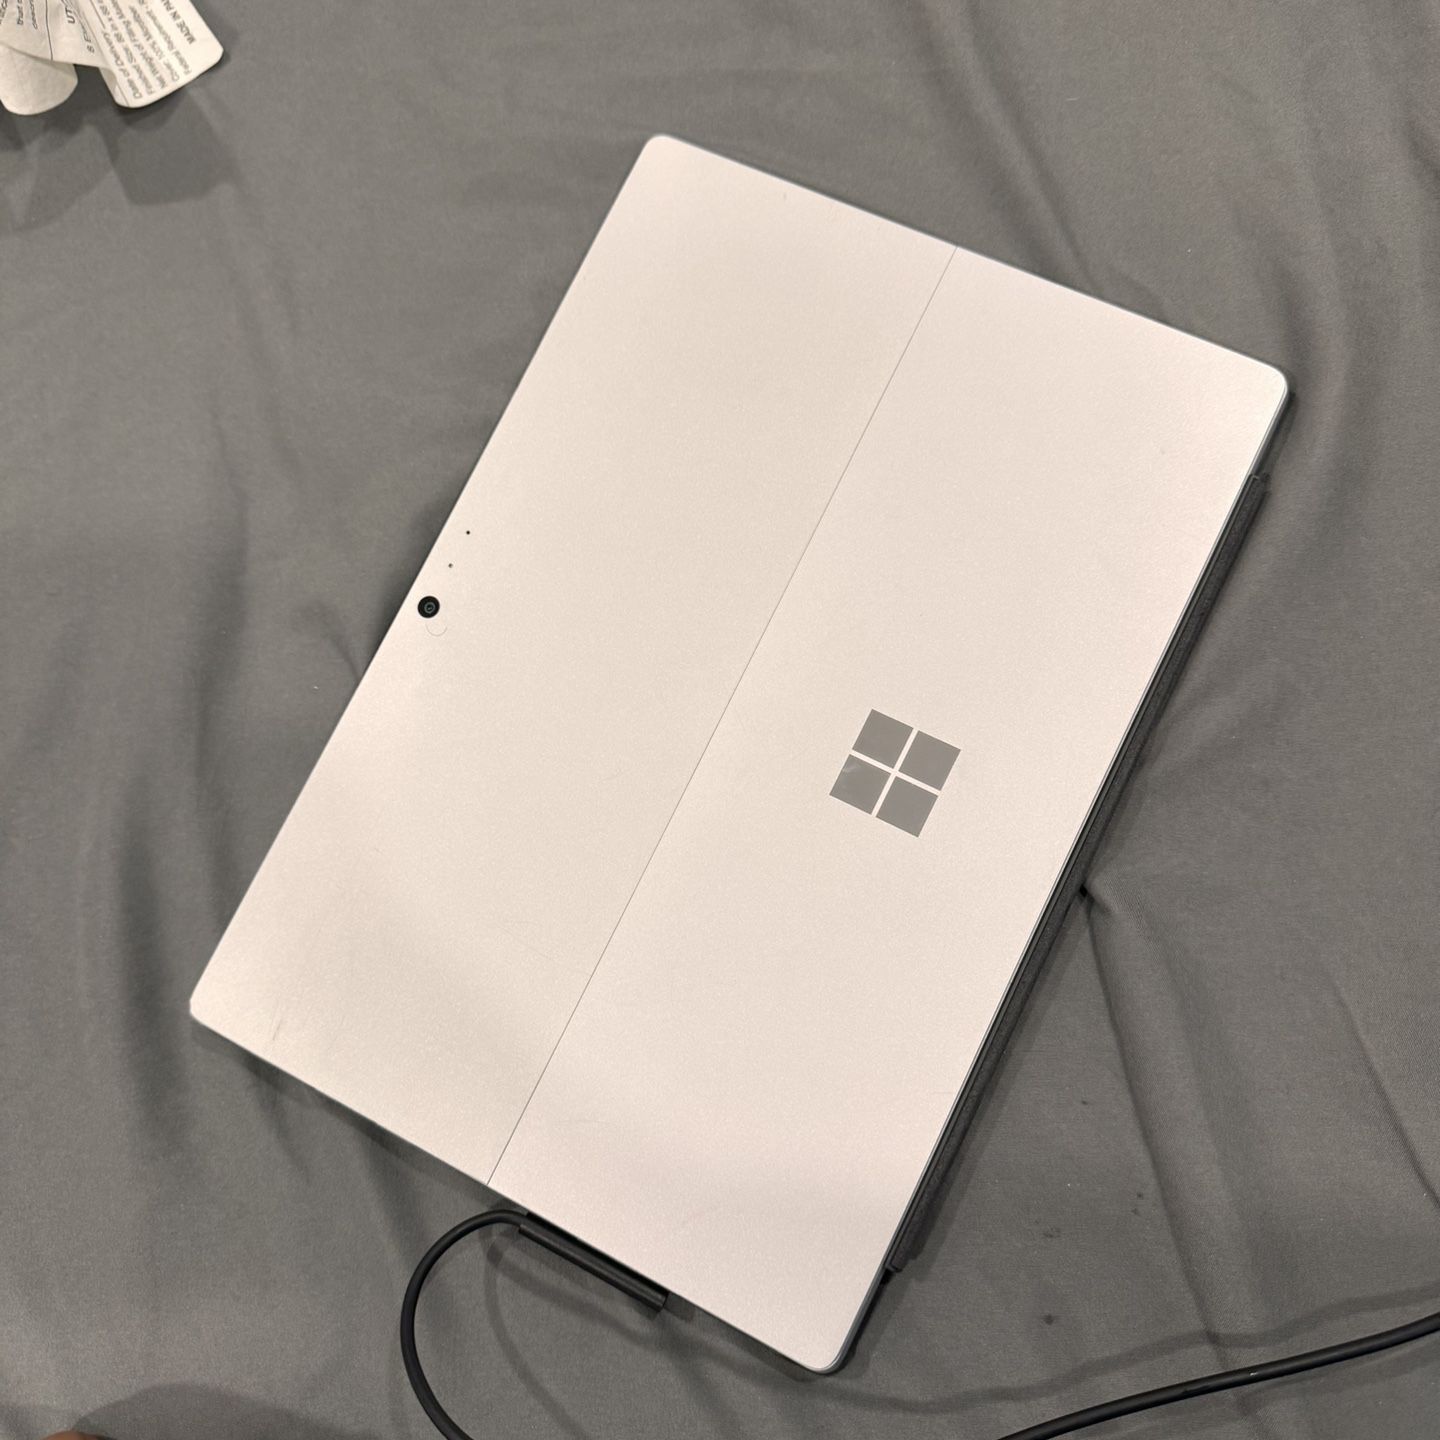 Microsoft Surface 4 With Keyboard